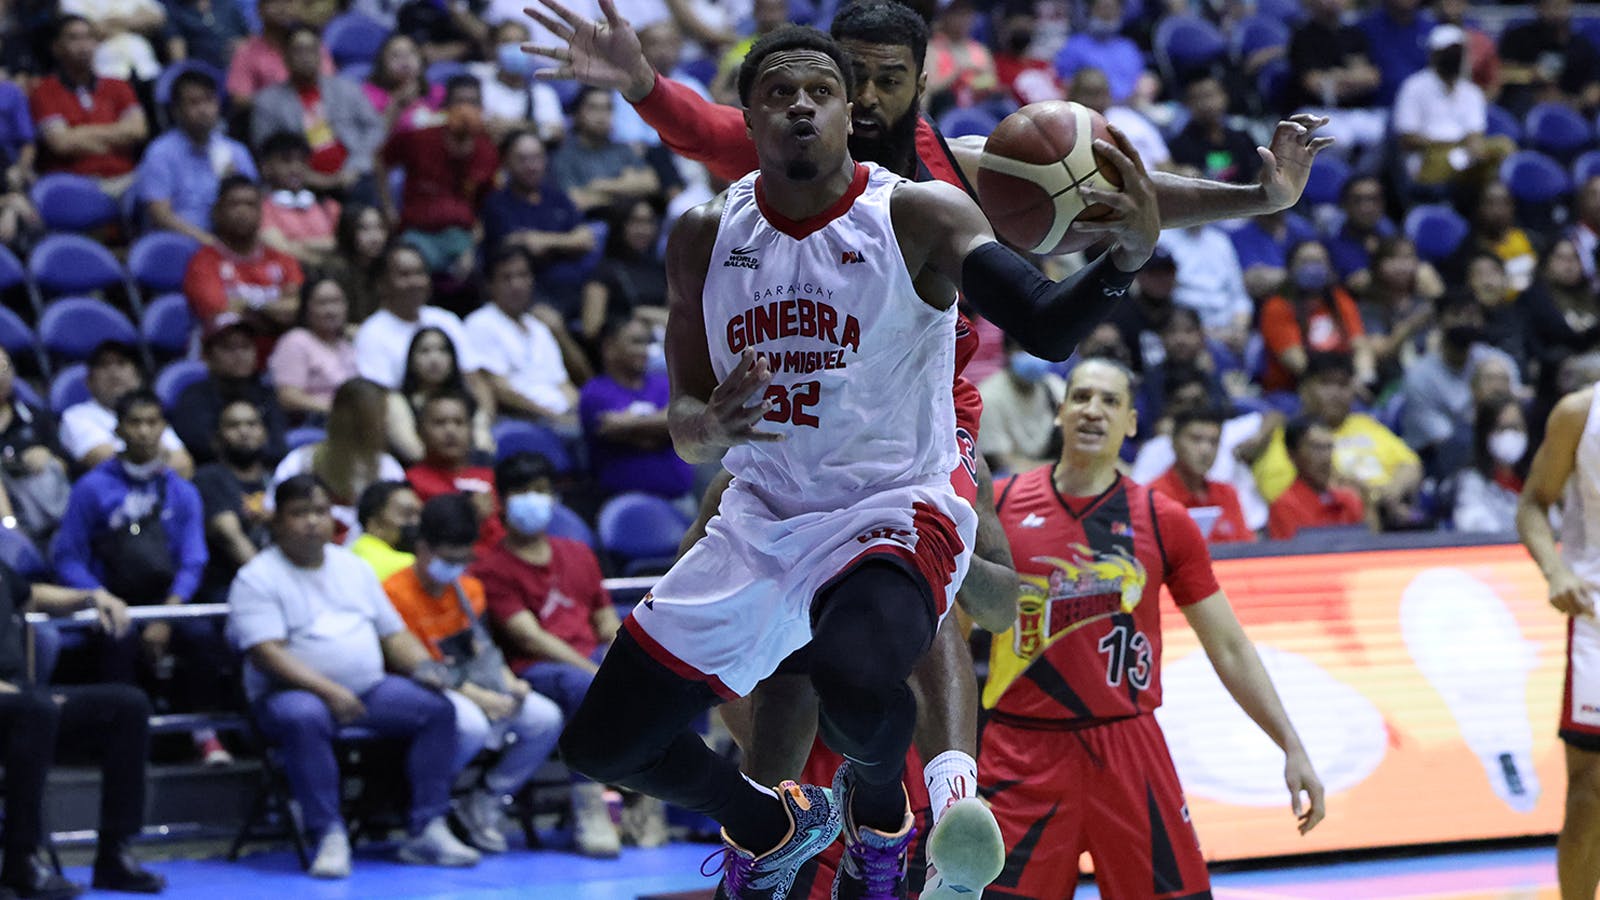 Preparing for worst: Ginebra looking for possible Justin Brownlee replacement in PBA Commissioner